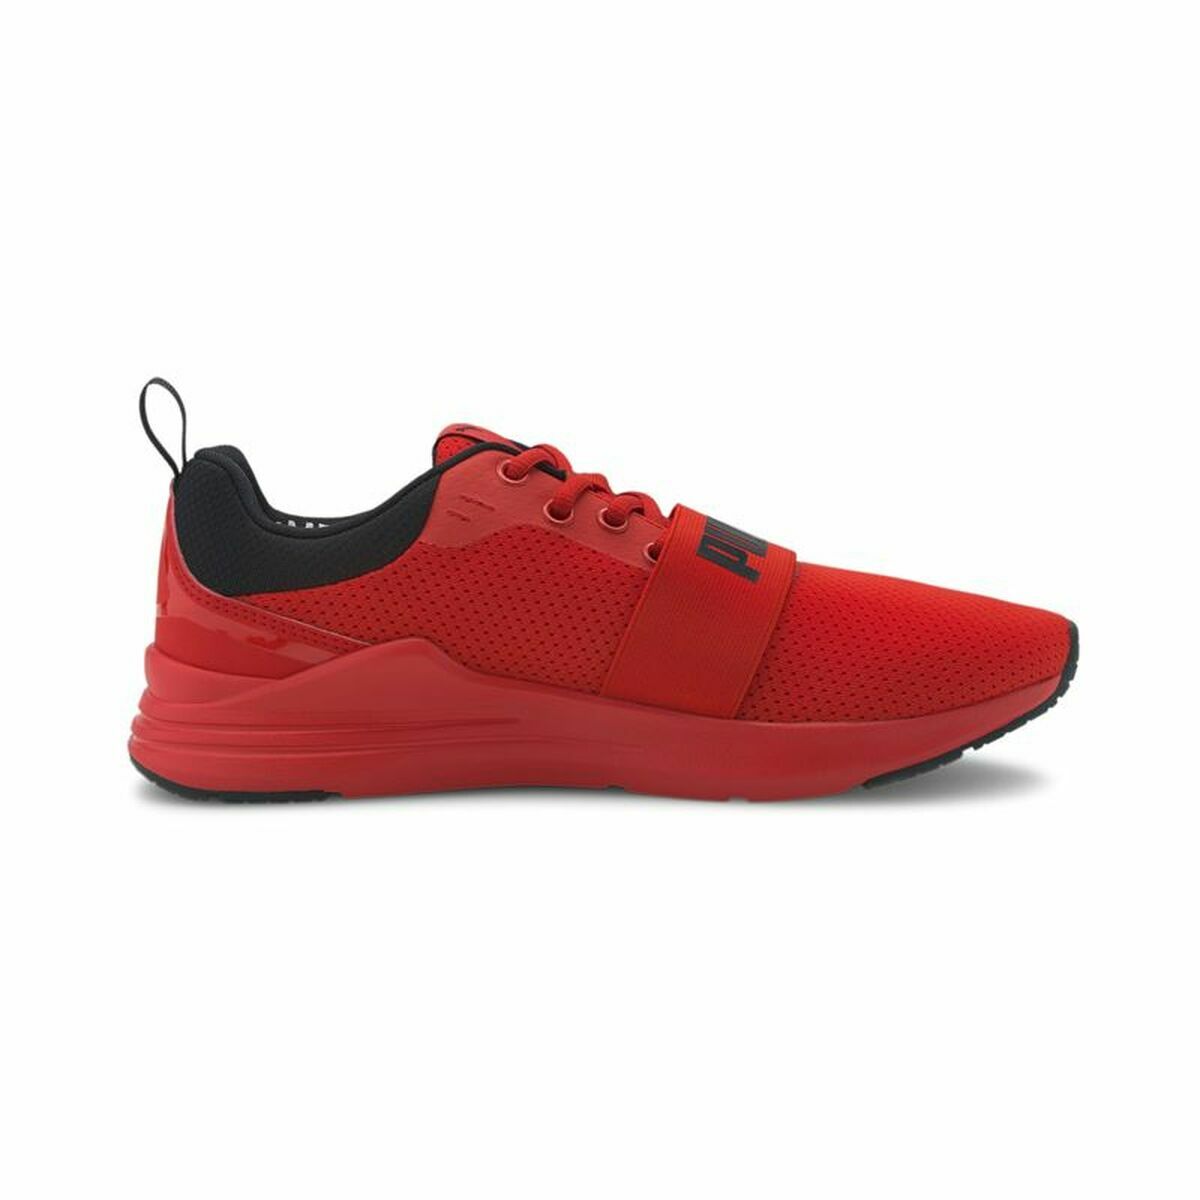 Running Shoes for Adults Puma Wired Red